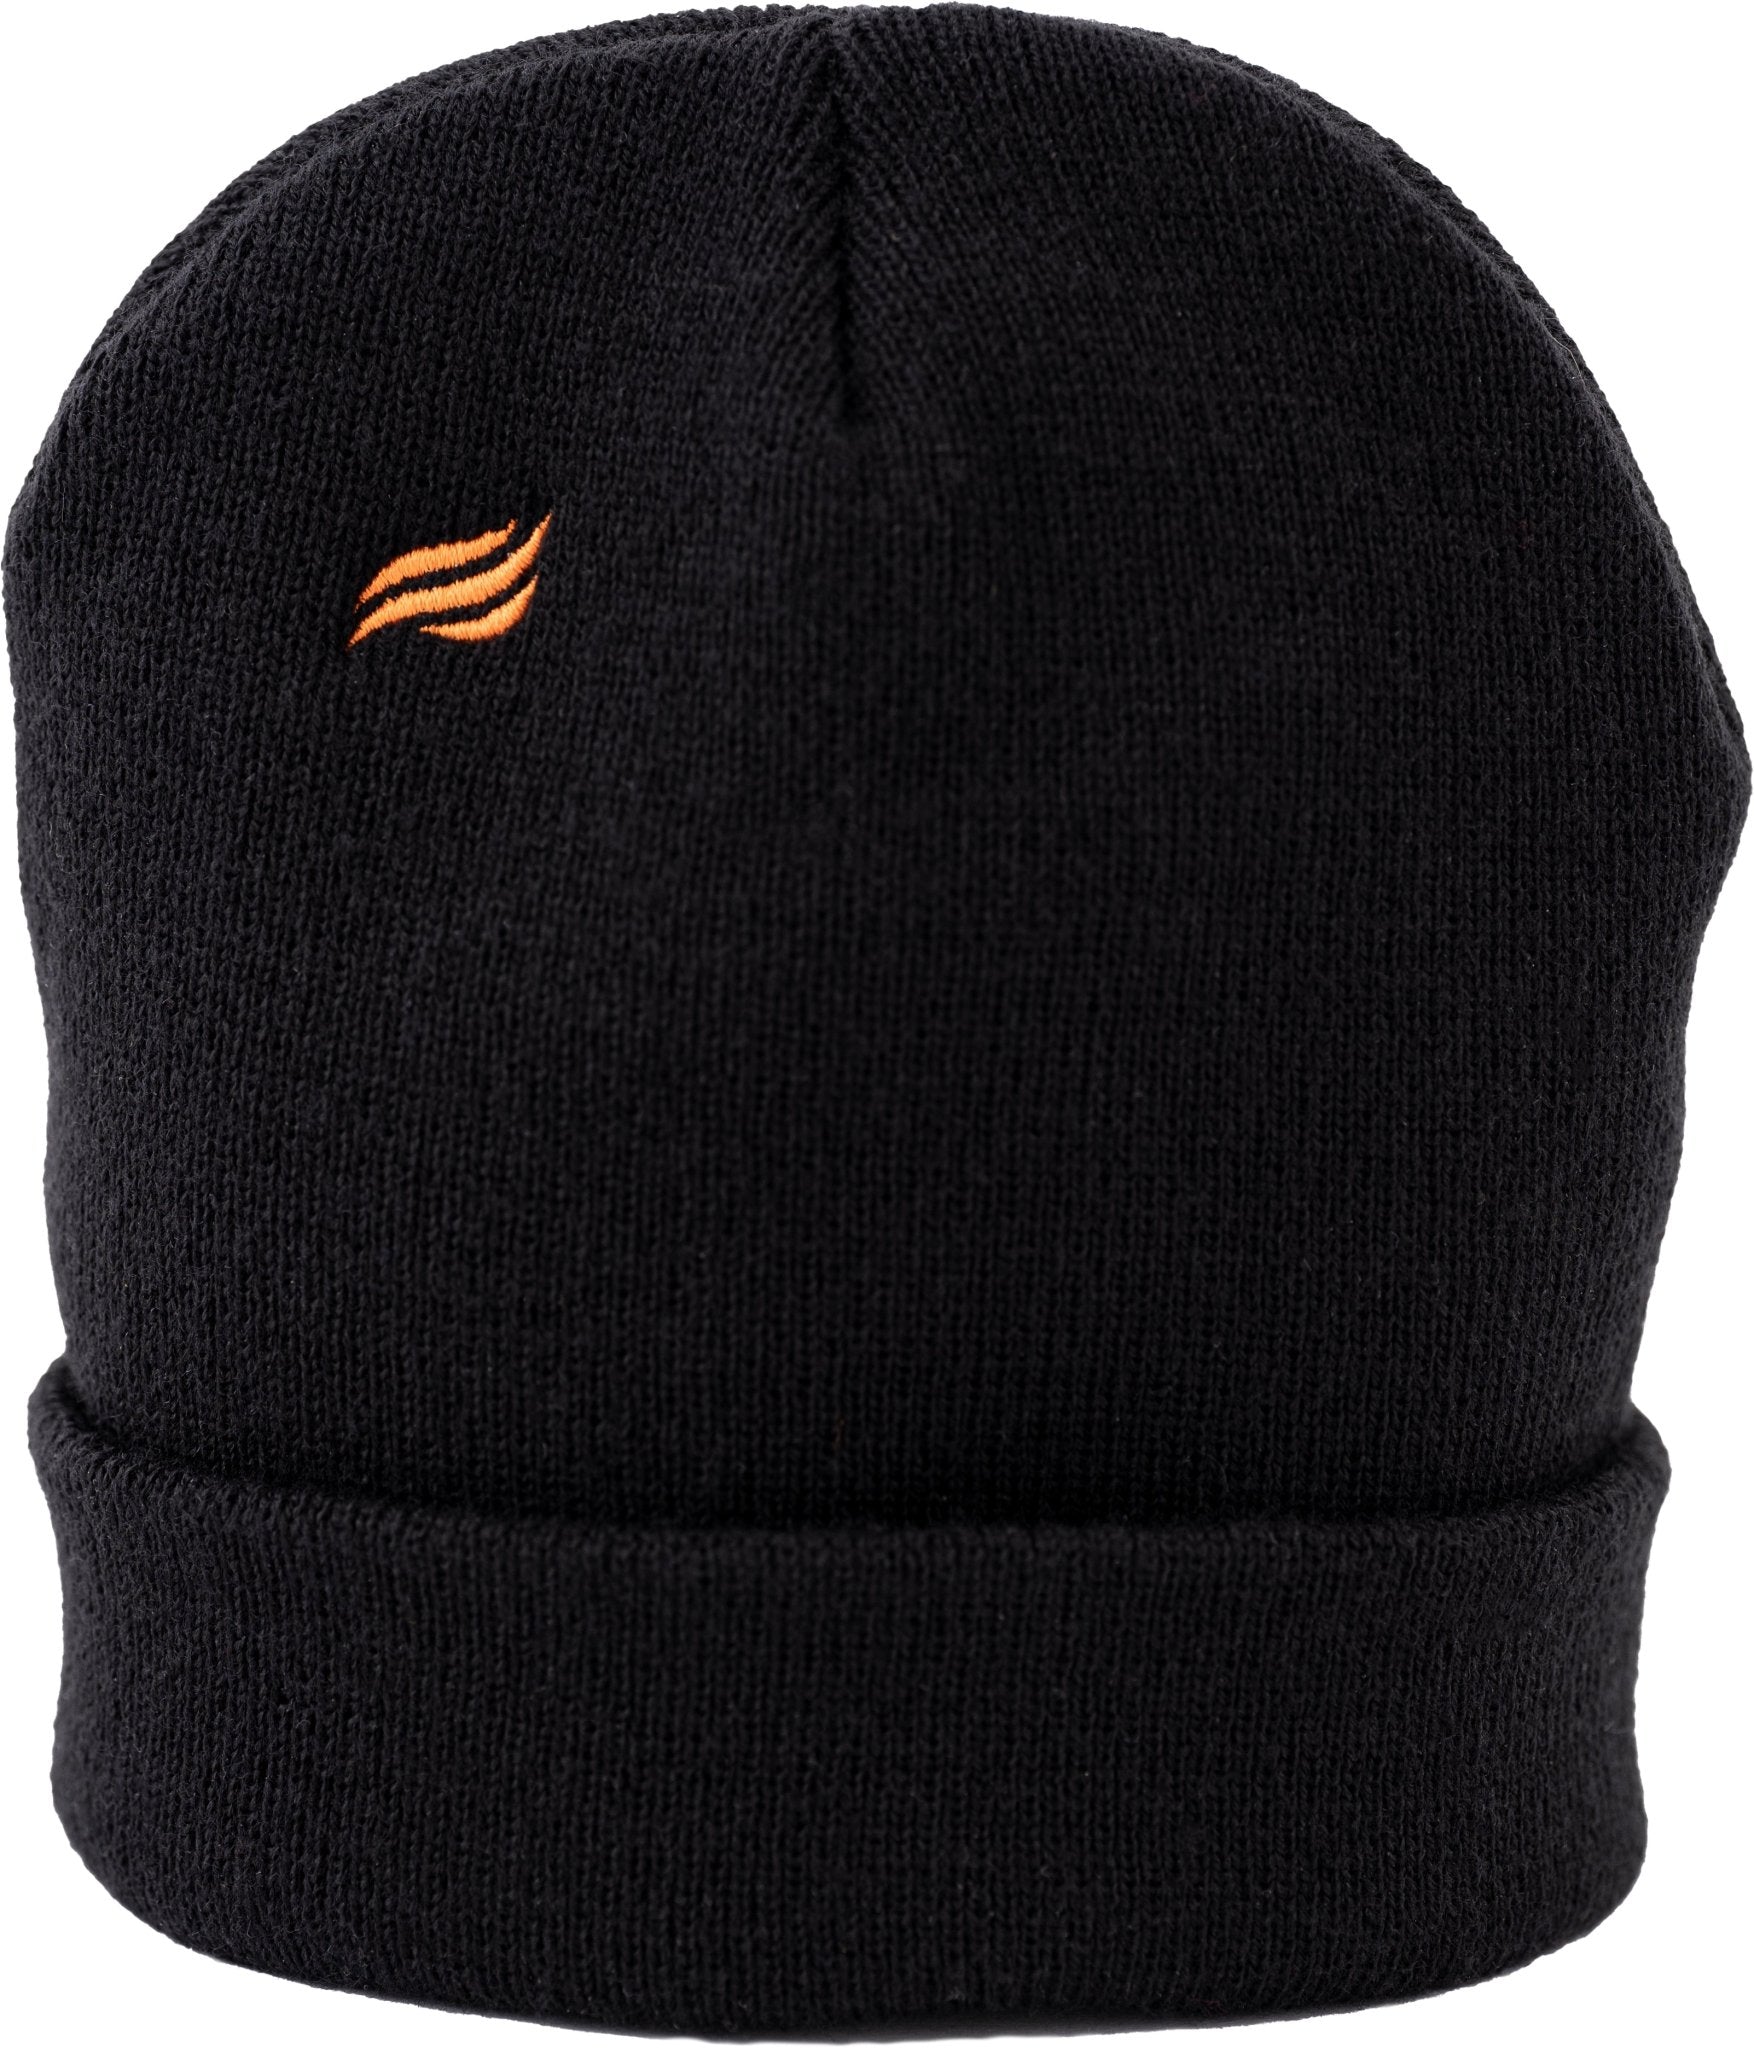 3045 beanie with flame - Blackstone Products